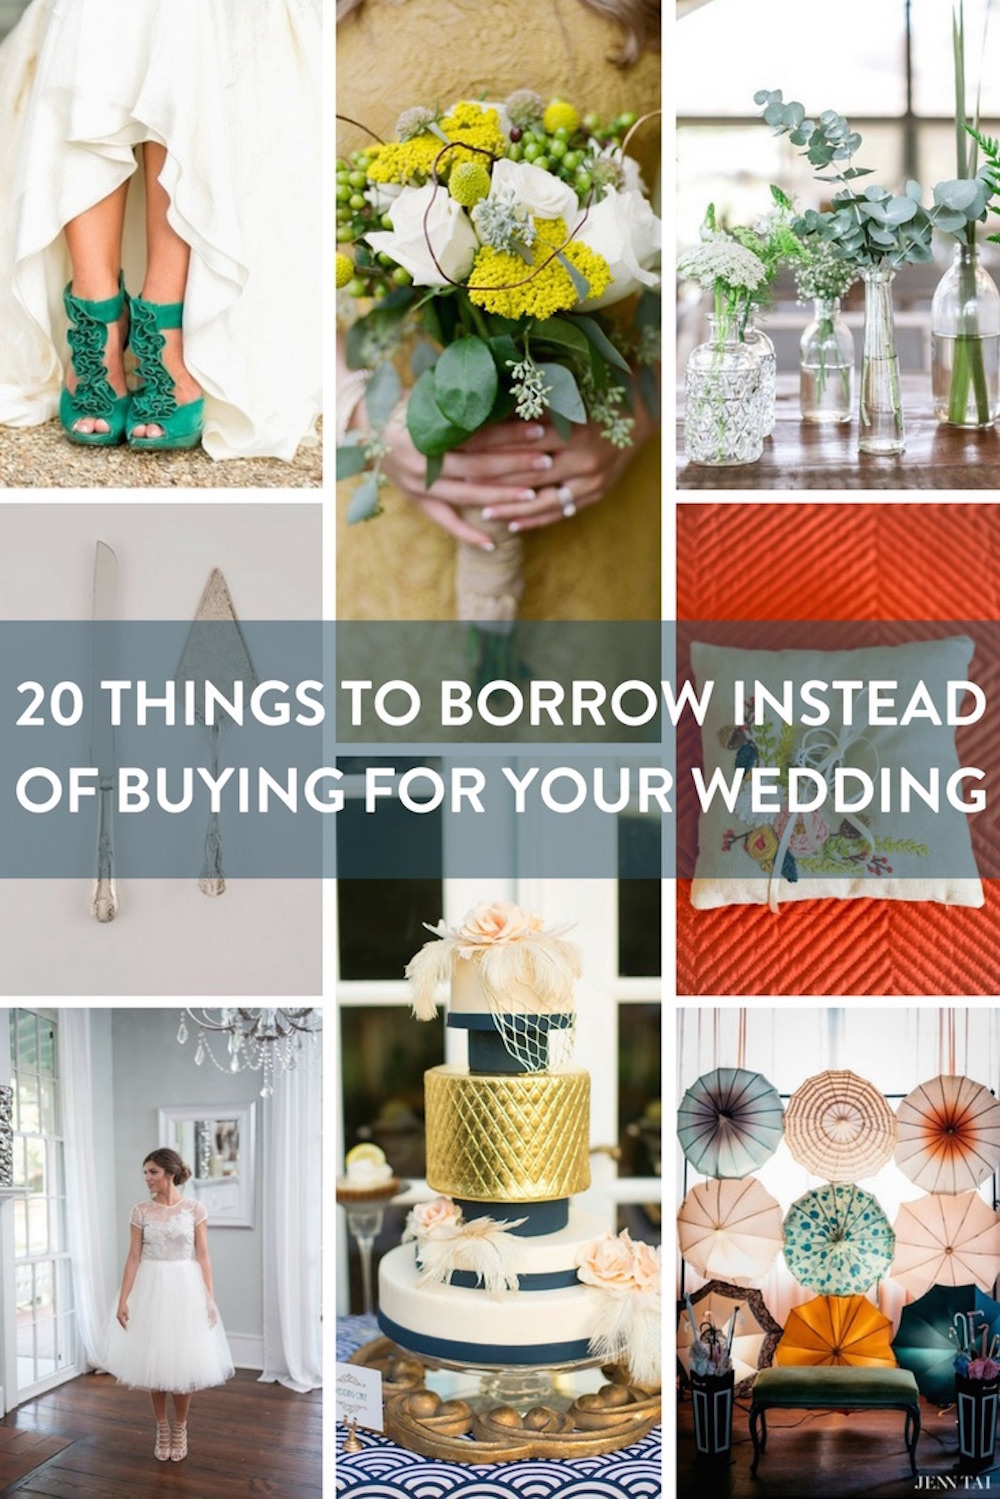 20 Things to Borrow Instead of Buy For Your Wedding